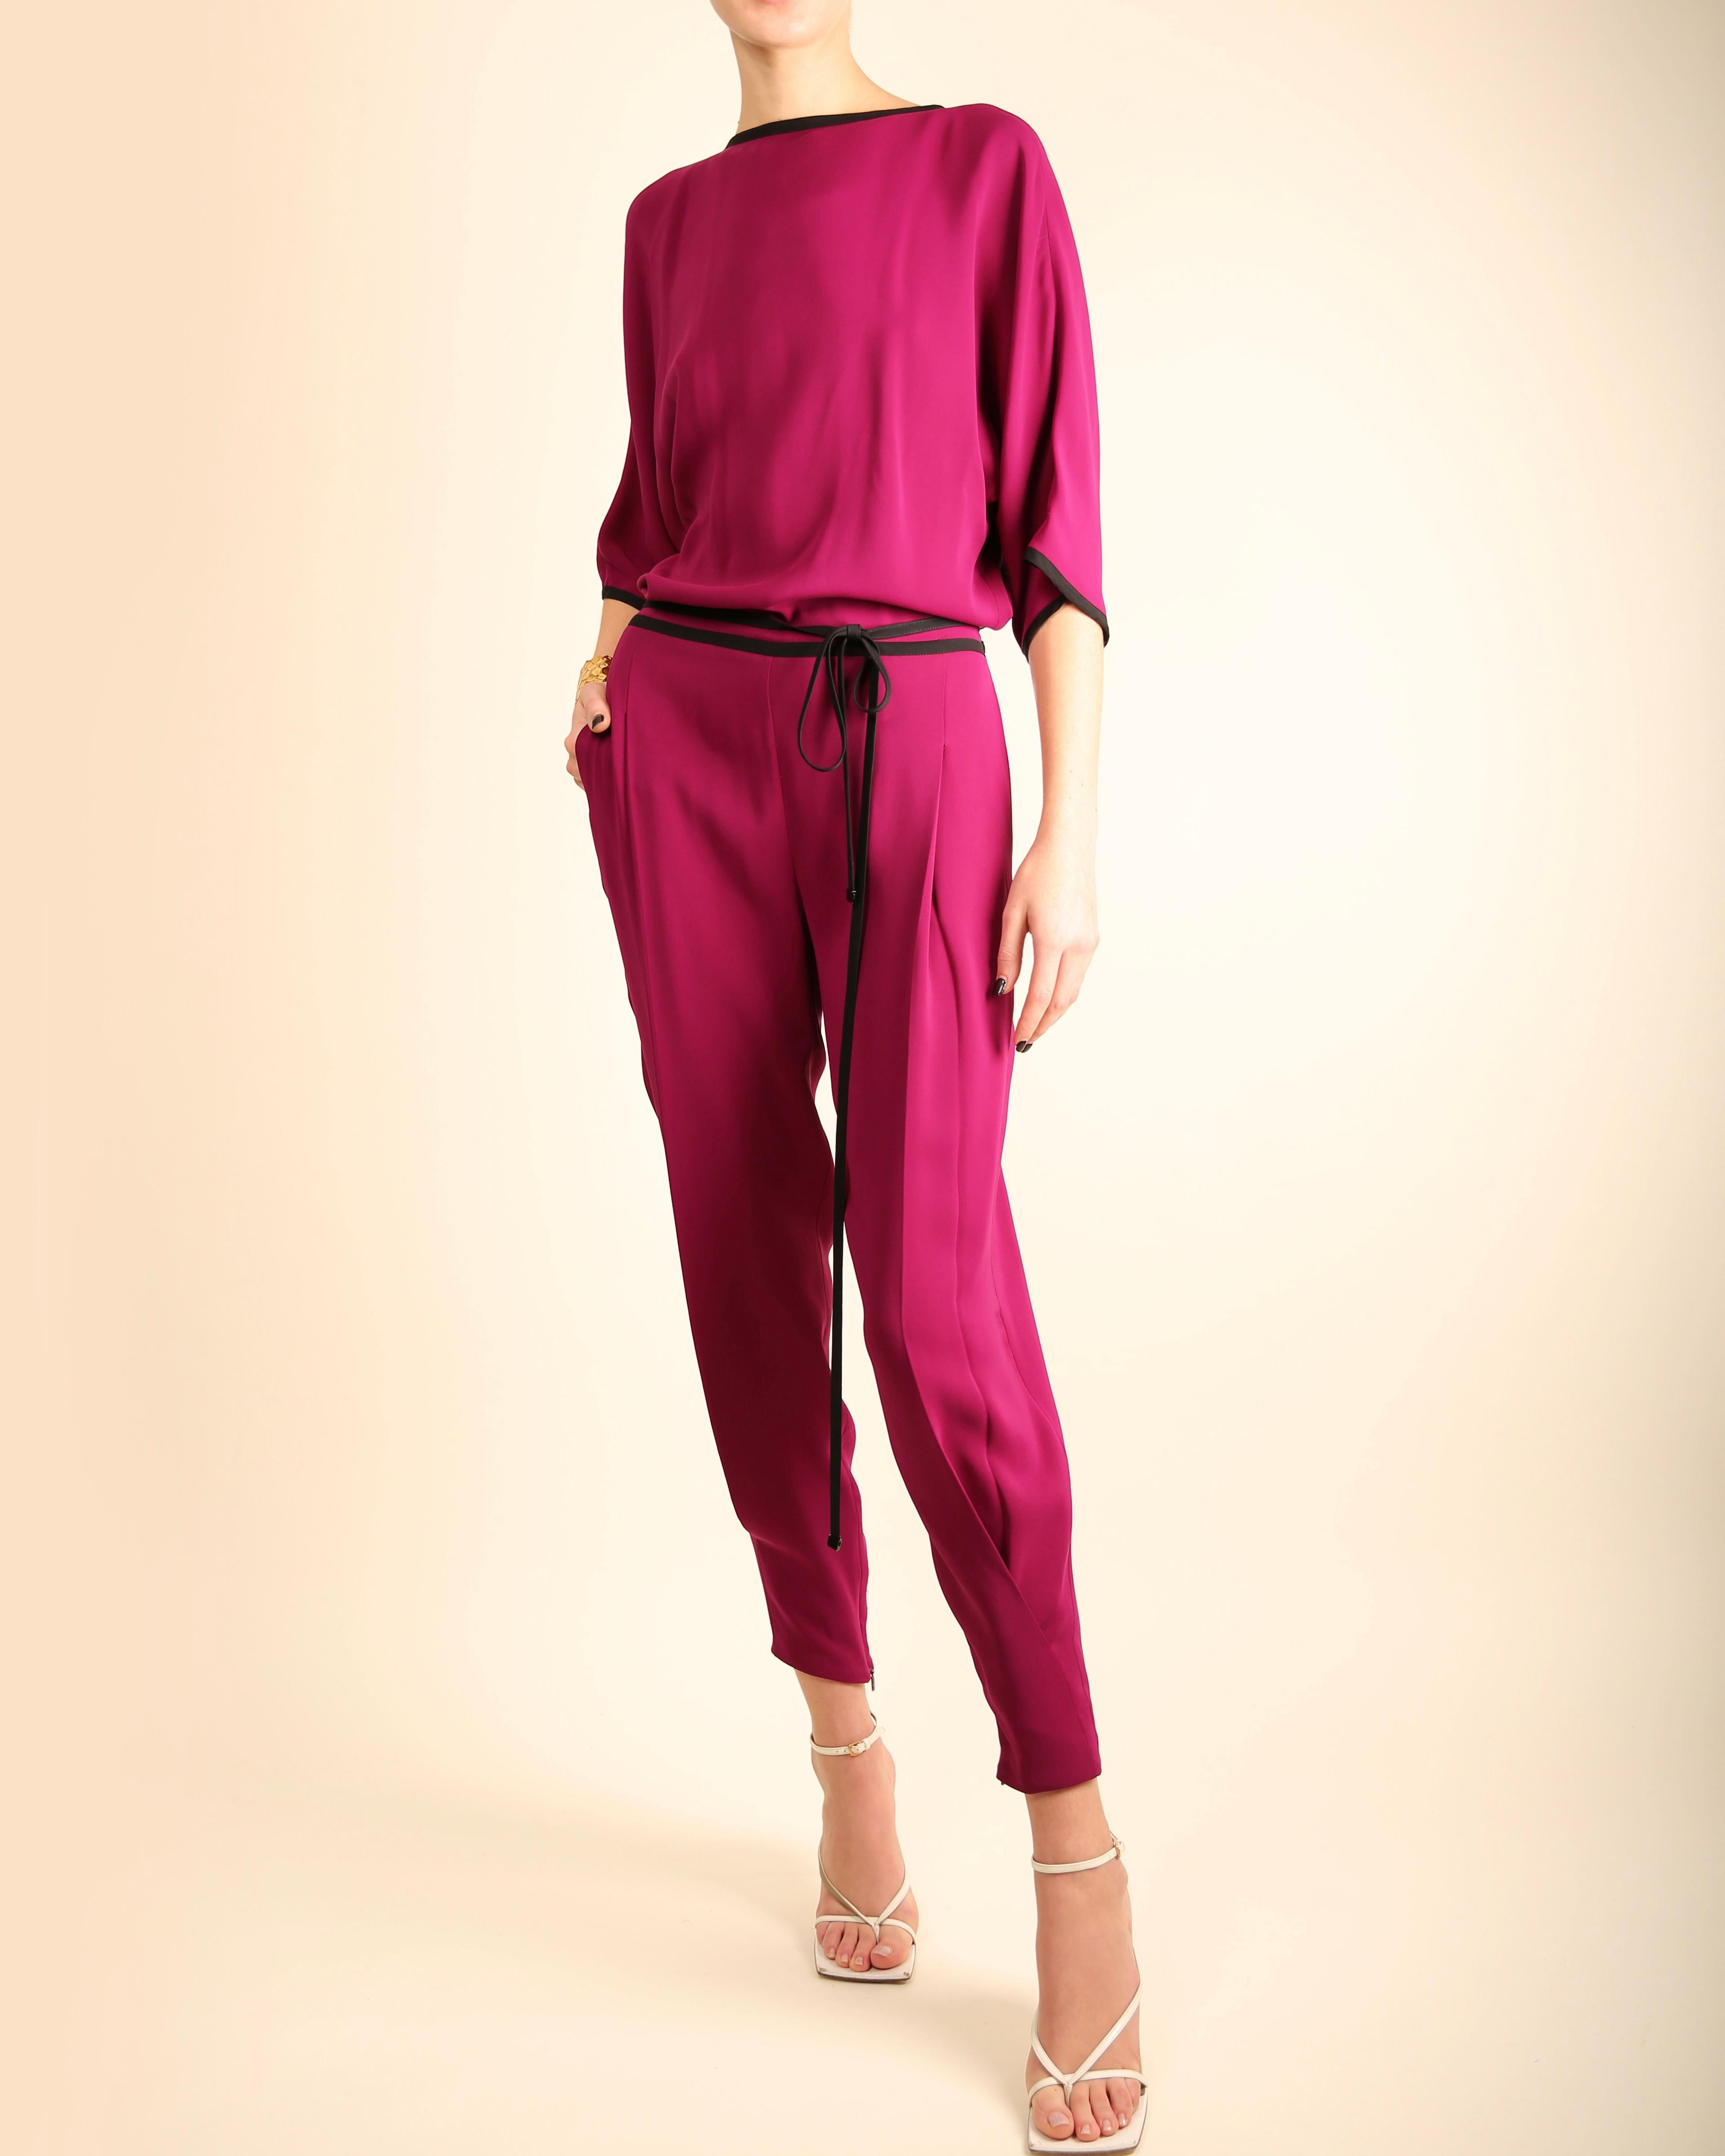 Pink Gucci S/S 2014 silk magenta black backless dolman tapered pant jumpsuit  For Sale